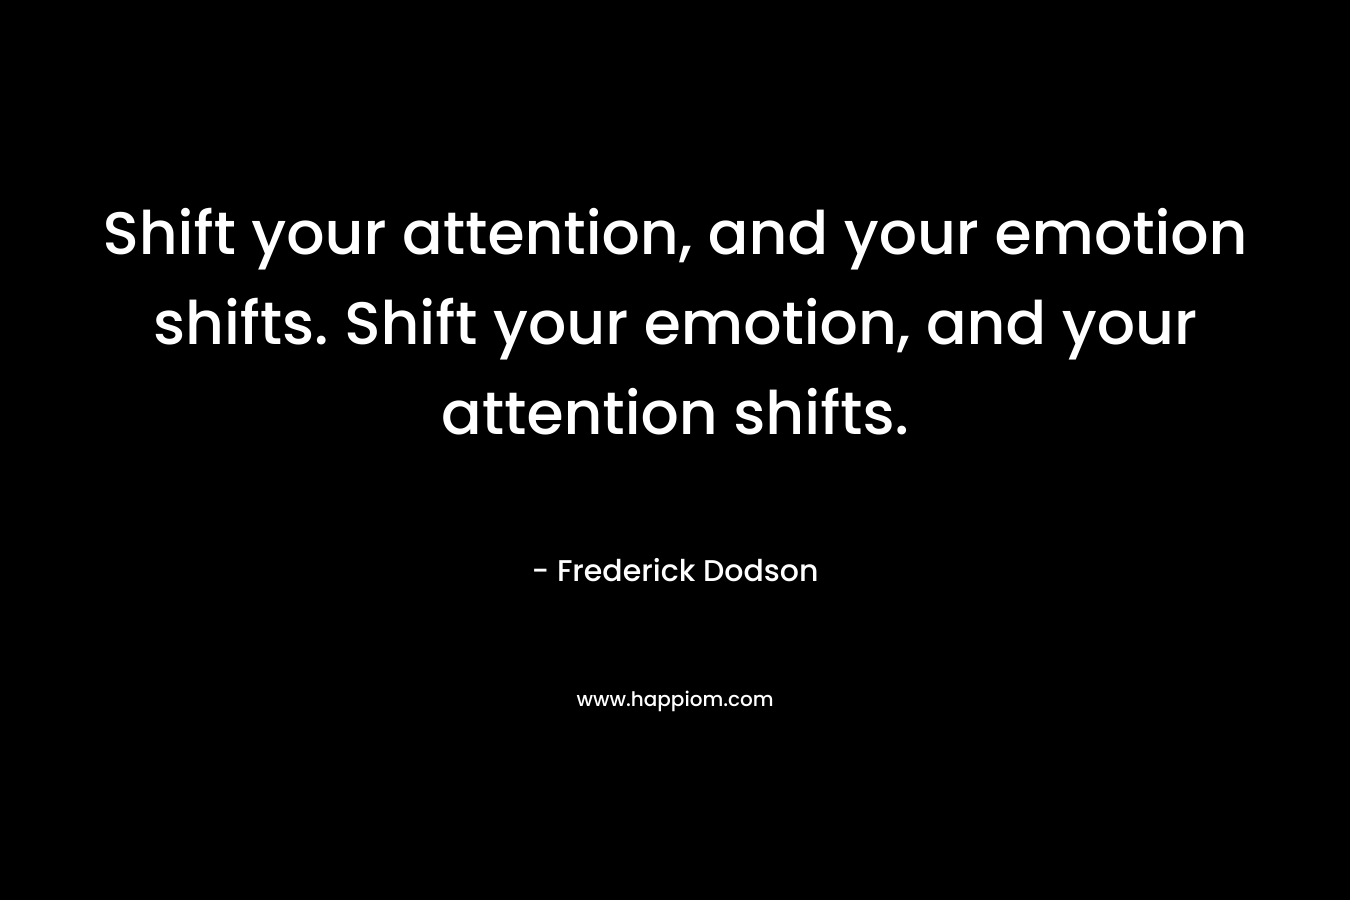 Shift your attention, and your emotion shifts. Shift your emotion, and your attention shifts. – Frederick Dodson